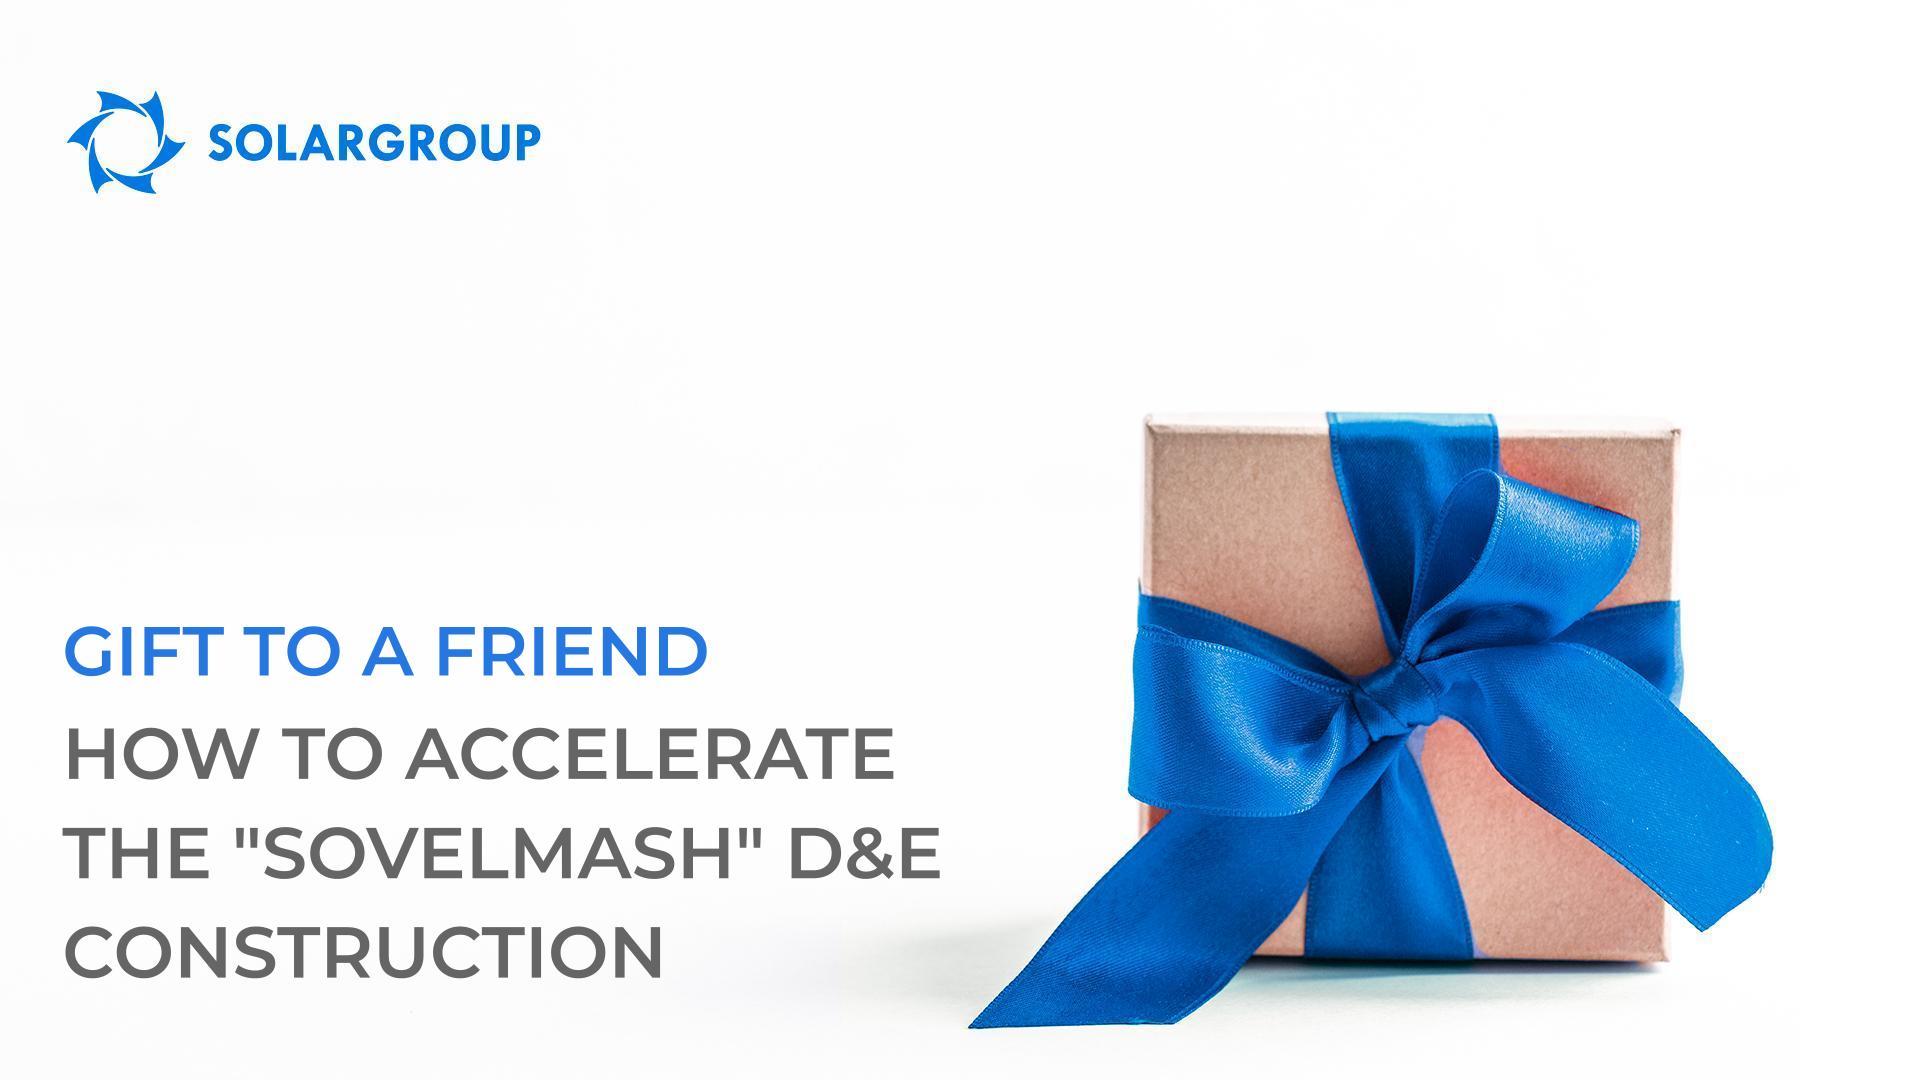 "Gift to a Friend": how to accelerate the "Sovelmash" D&E construction